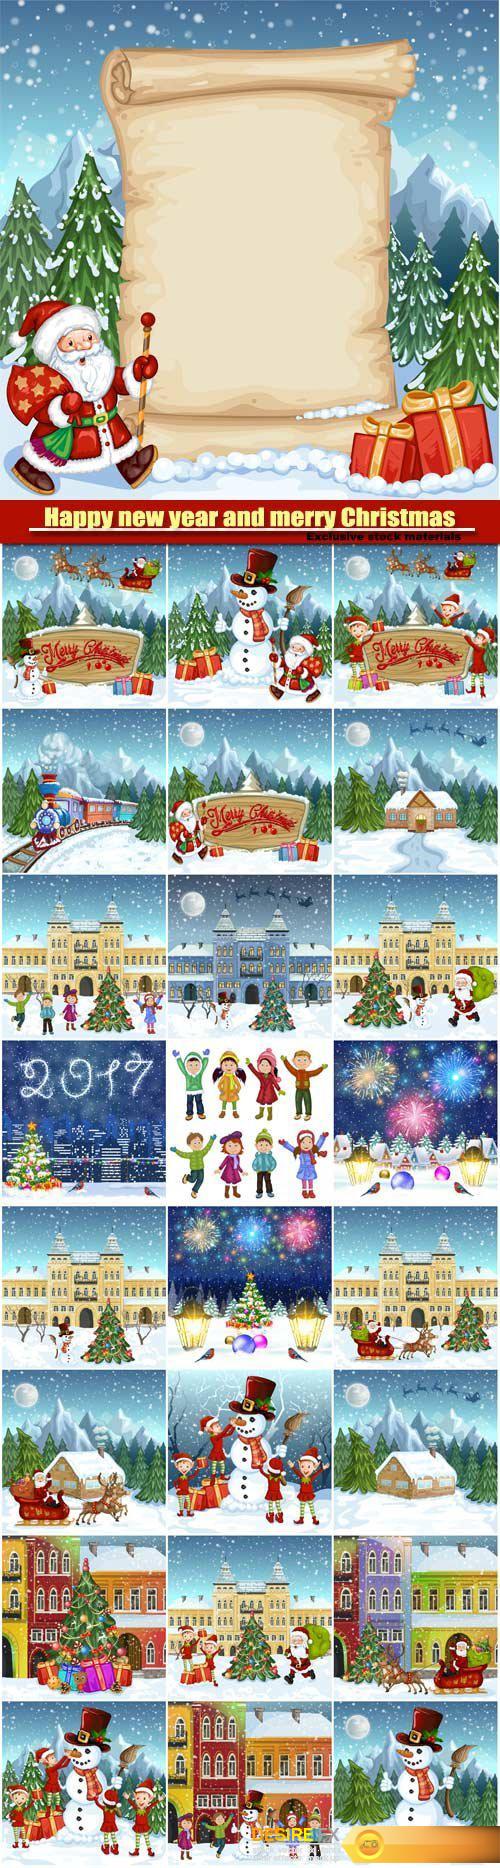 Happy new year and merry Christmas vector, winter town, children with snowman